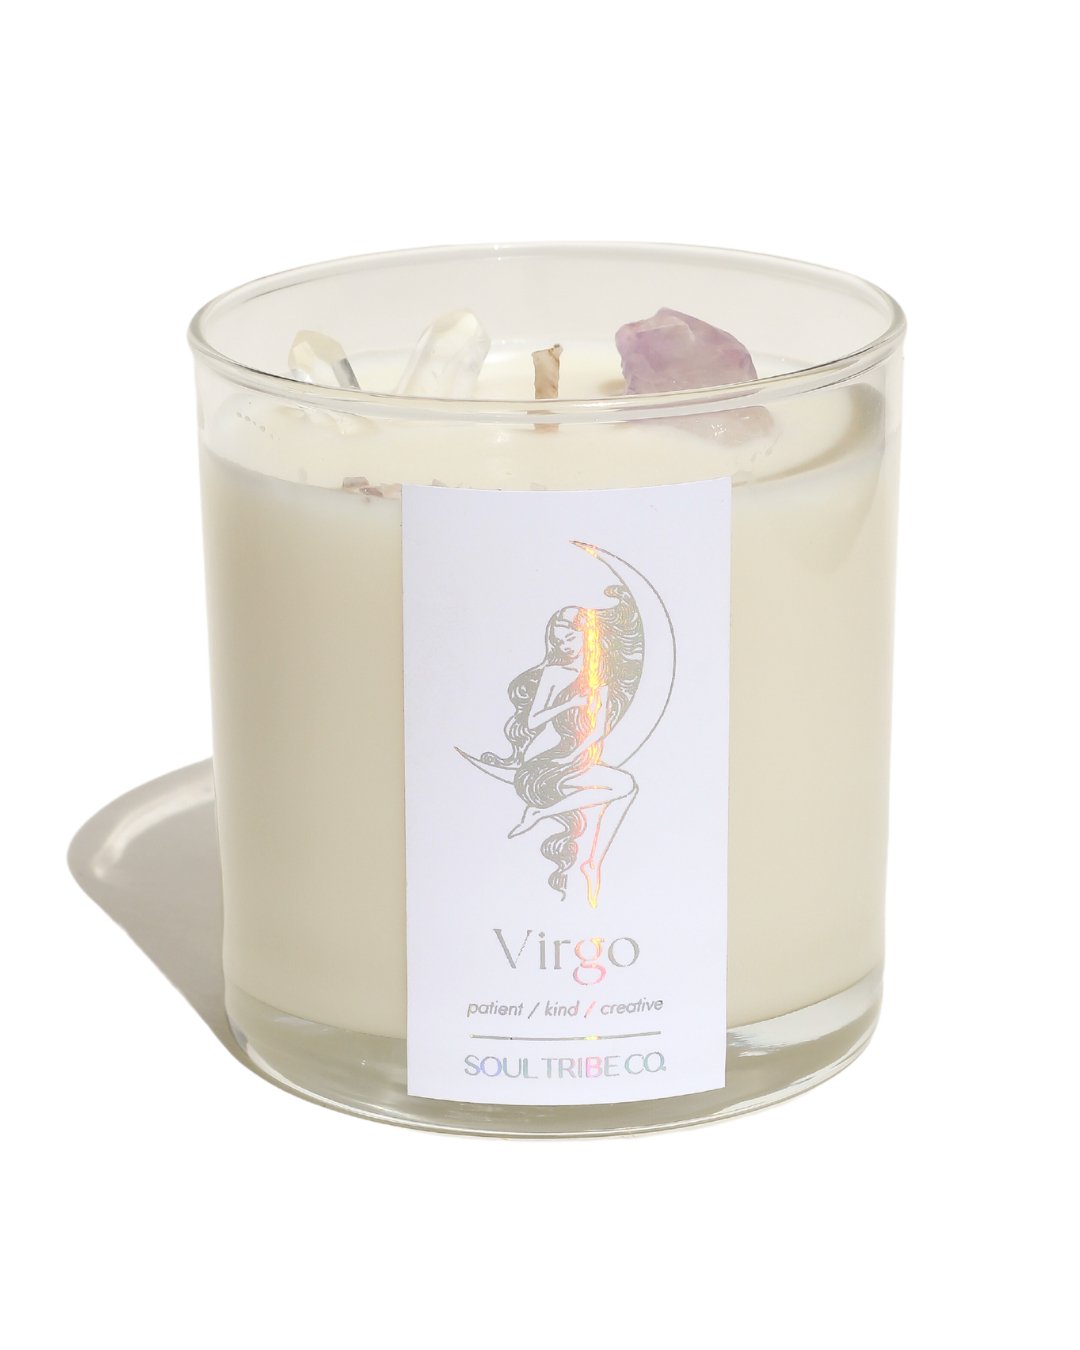 Virgo Candle - Soul Tribe Co.